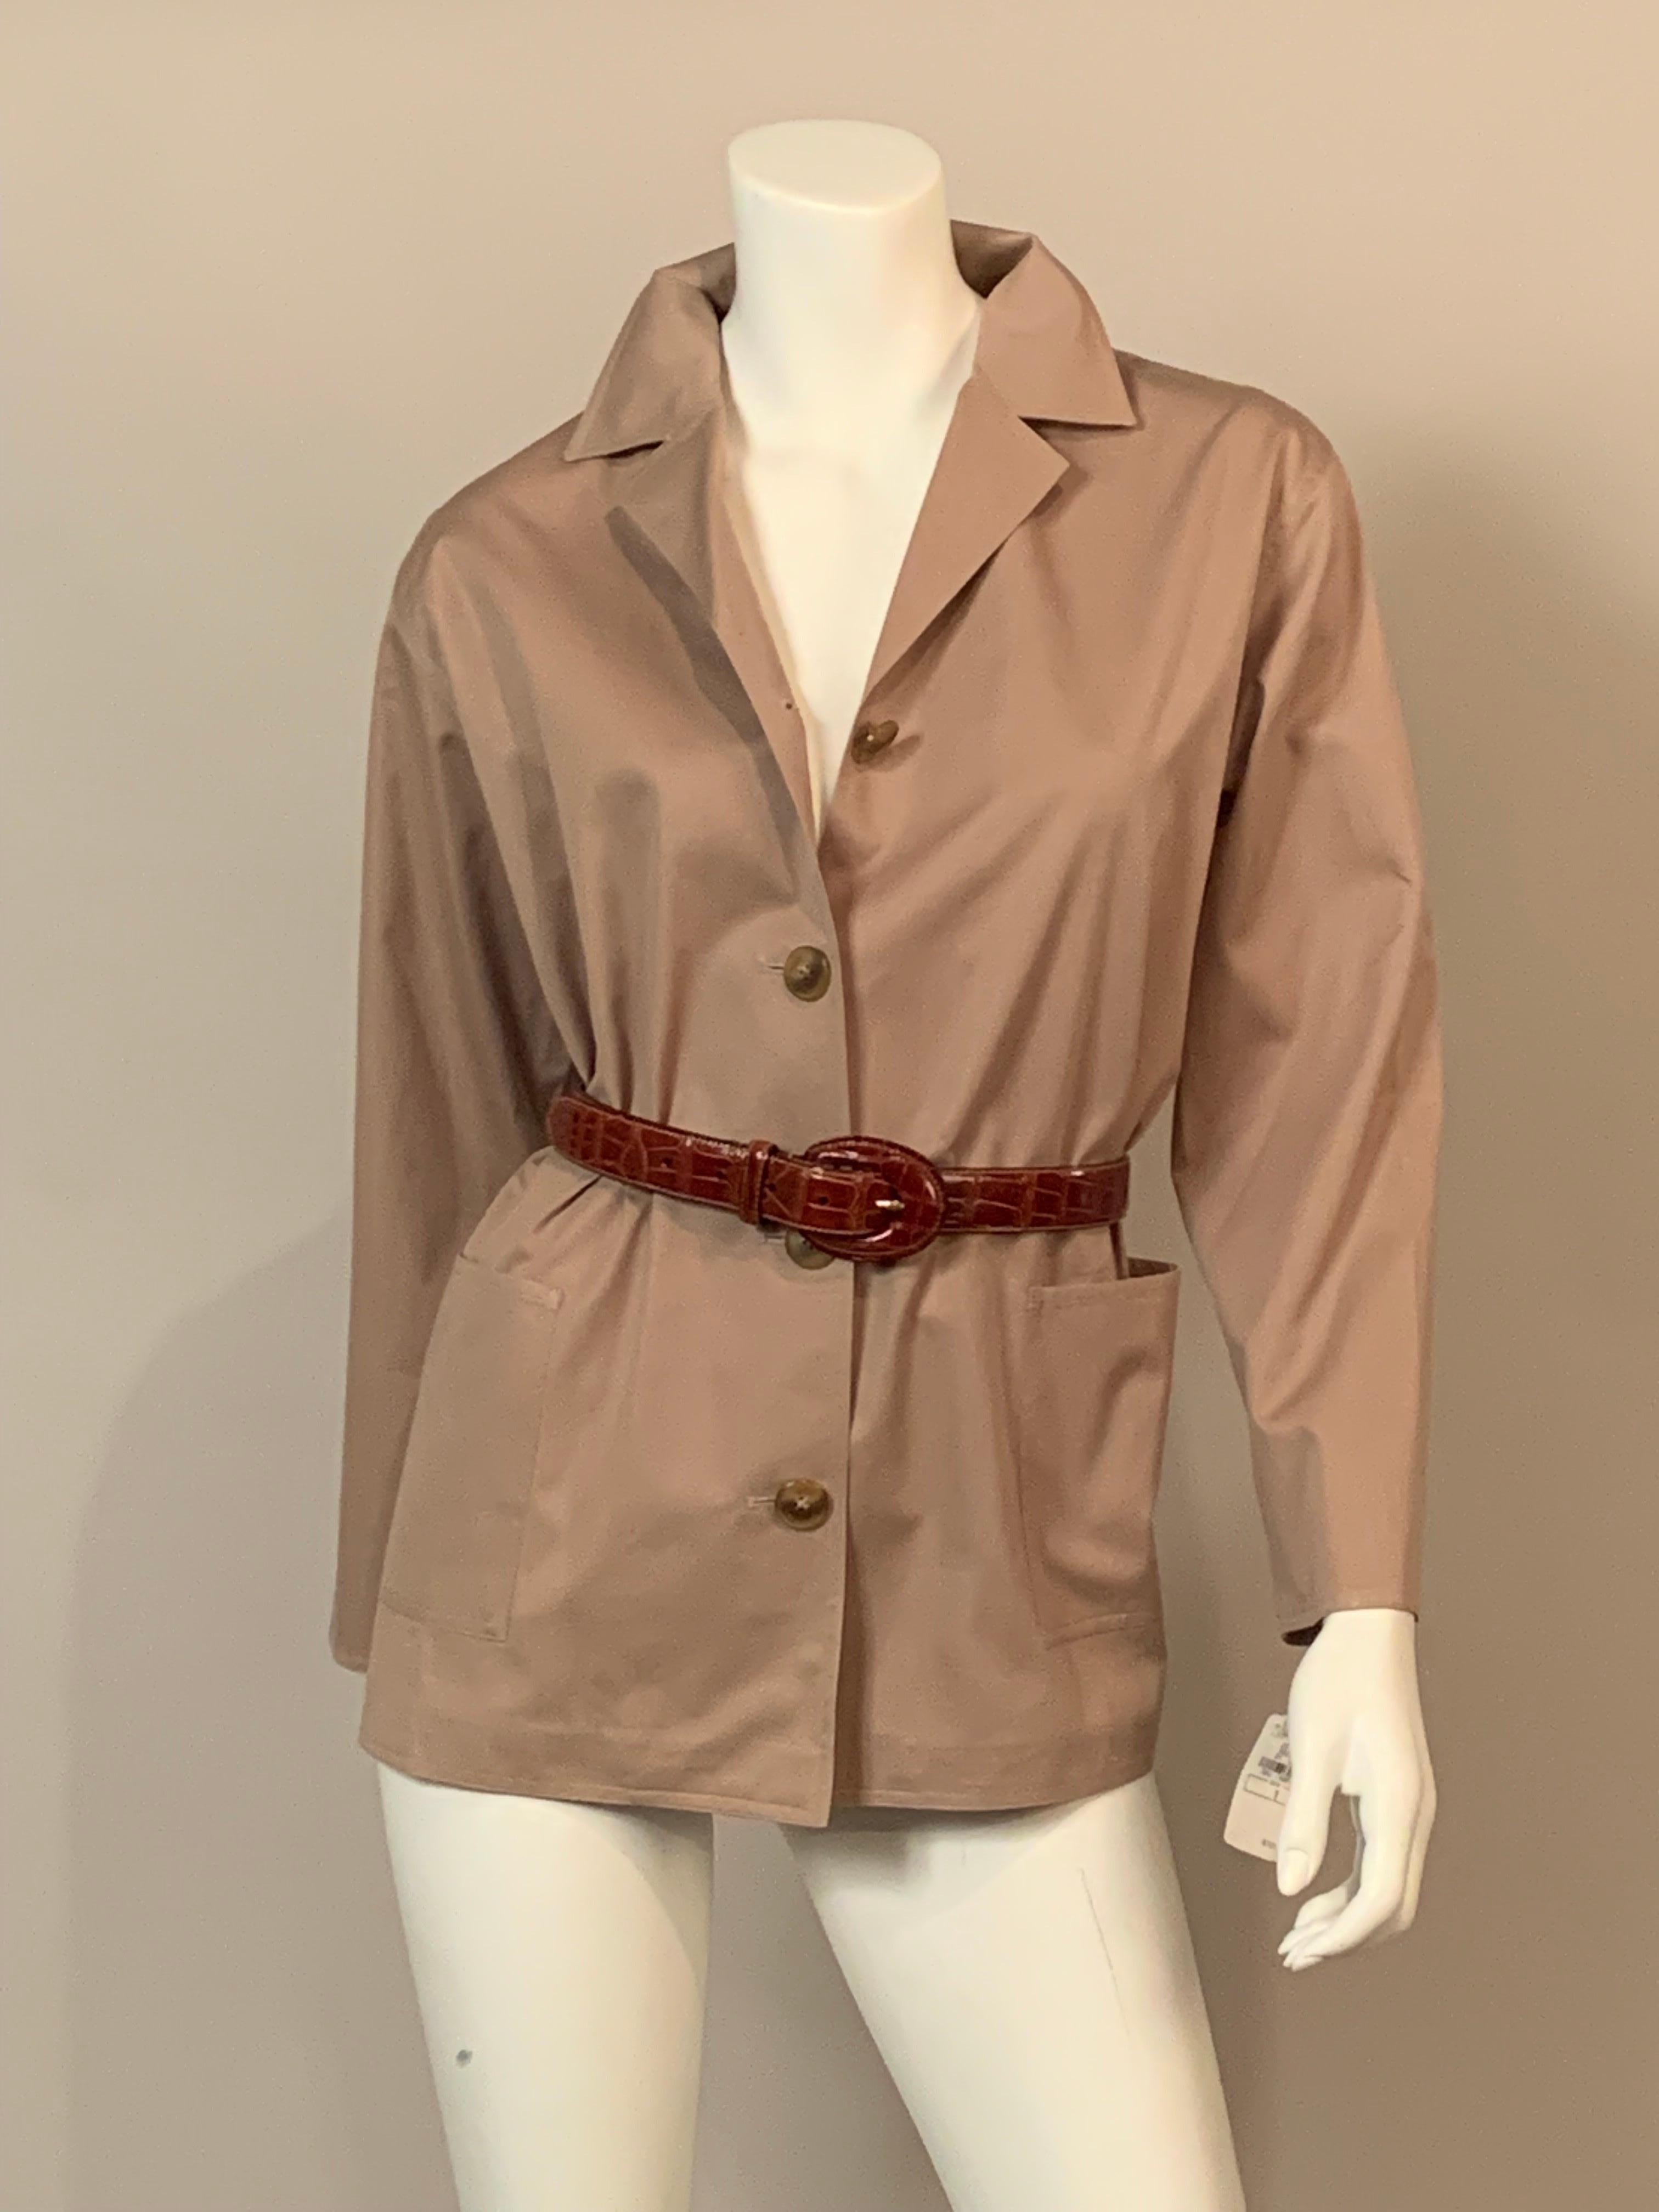 An unlined cotton jacket with a button front and two patch pockets can be worn as a jacket or a loose shirt. Belt it and it becomes a more formal look.  { The American Alligator belt is sold separately }.  The jacket is a size one and it is in